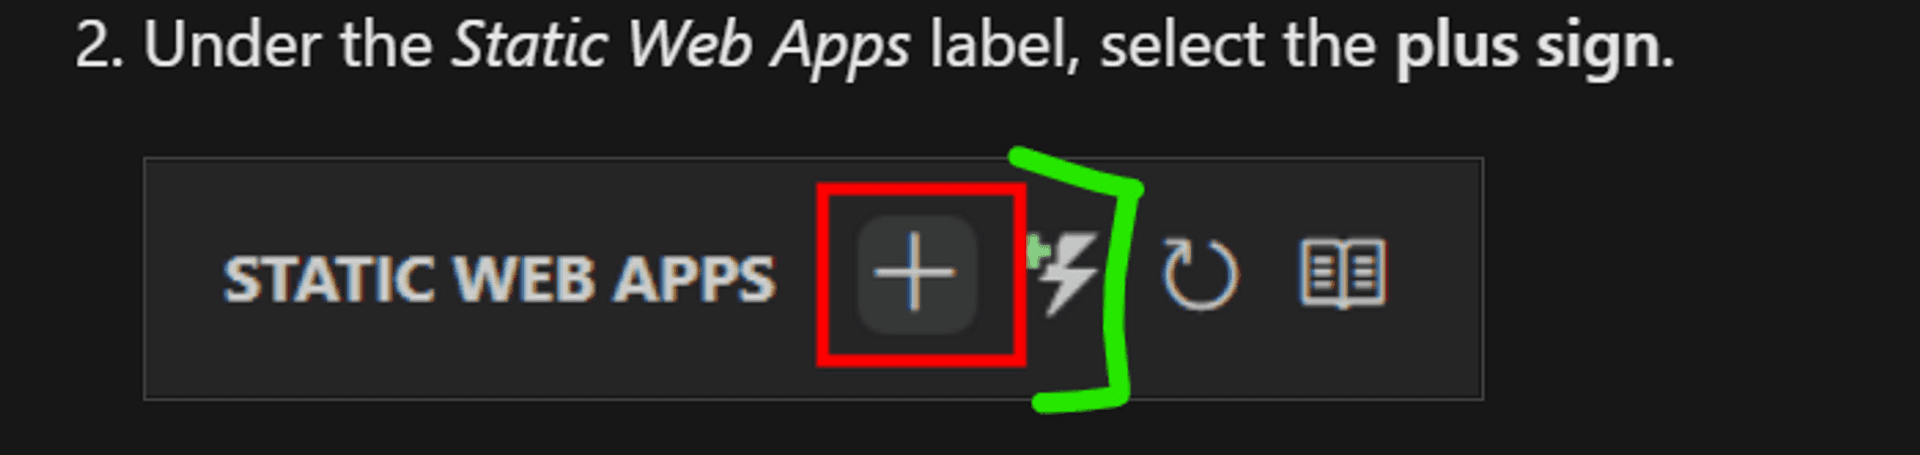 VS Code extension for Azure Static Web Apps with a plus icon boxed in red highlight and an adjacent lightning icon fenced in green highlight